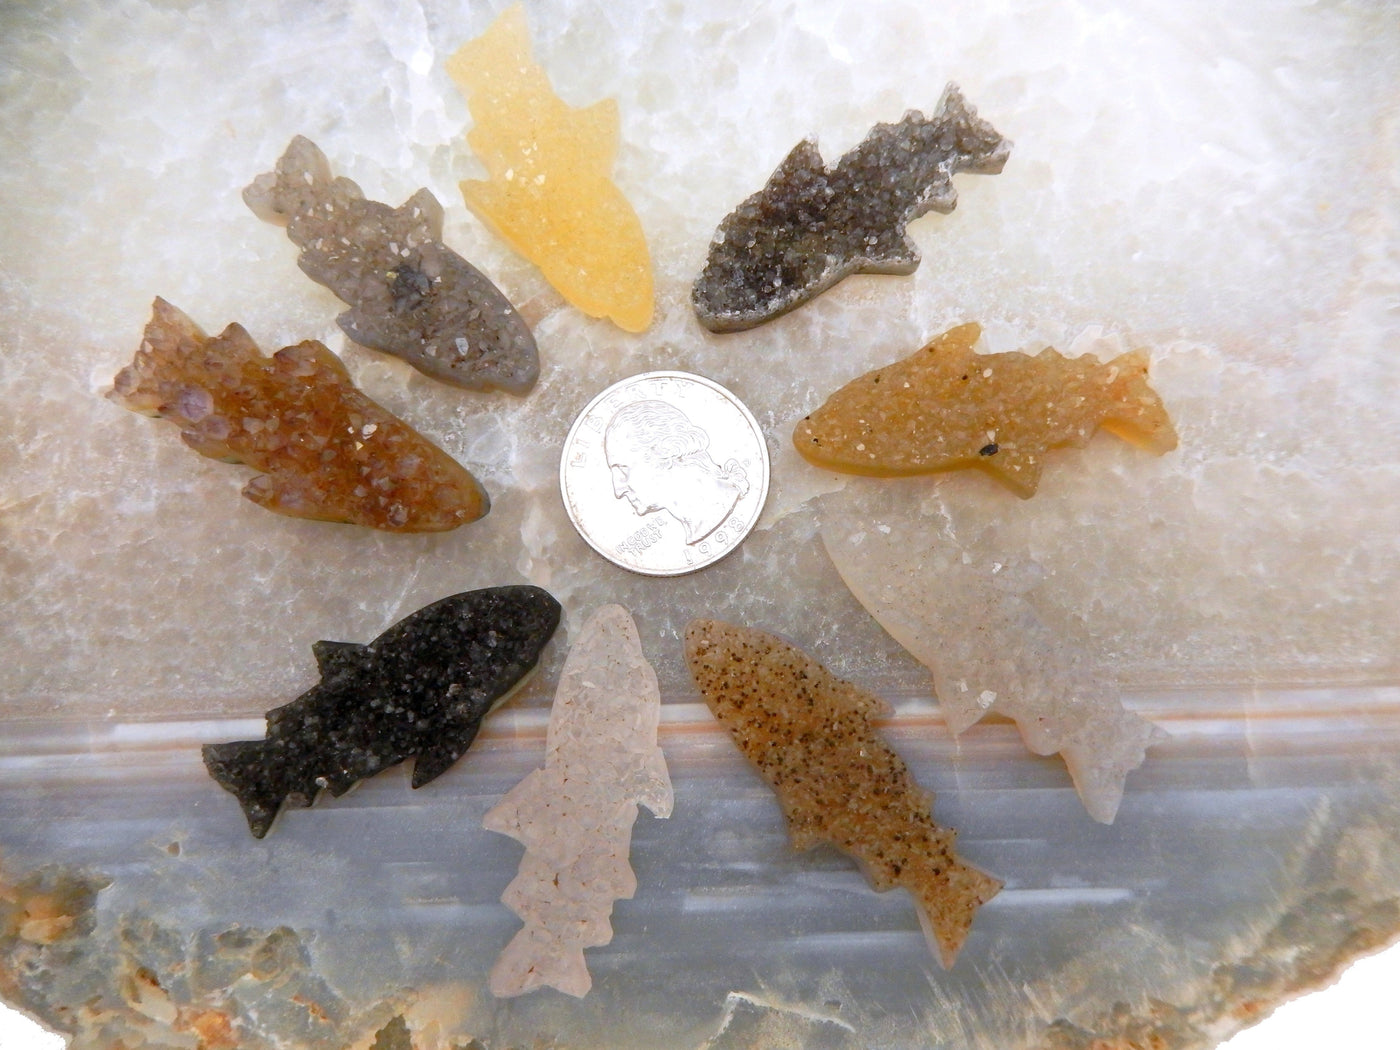 9 druzy shark cabochons surrounding a quarter for size reference